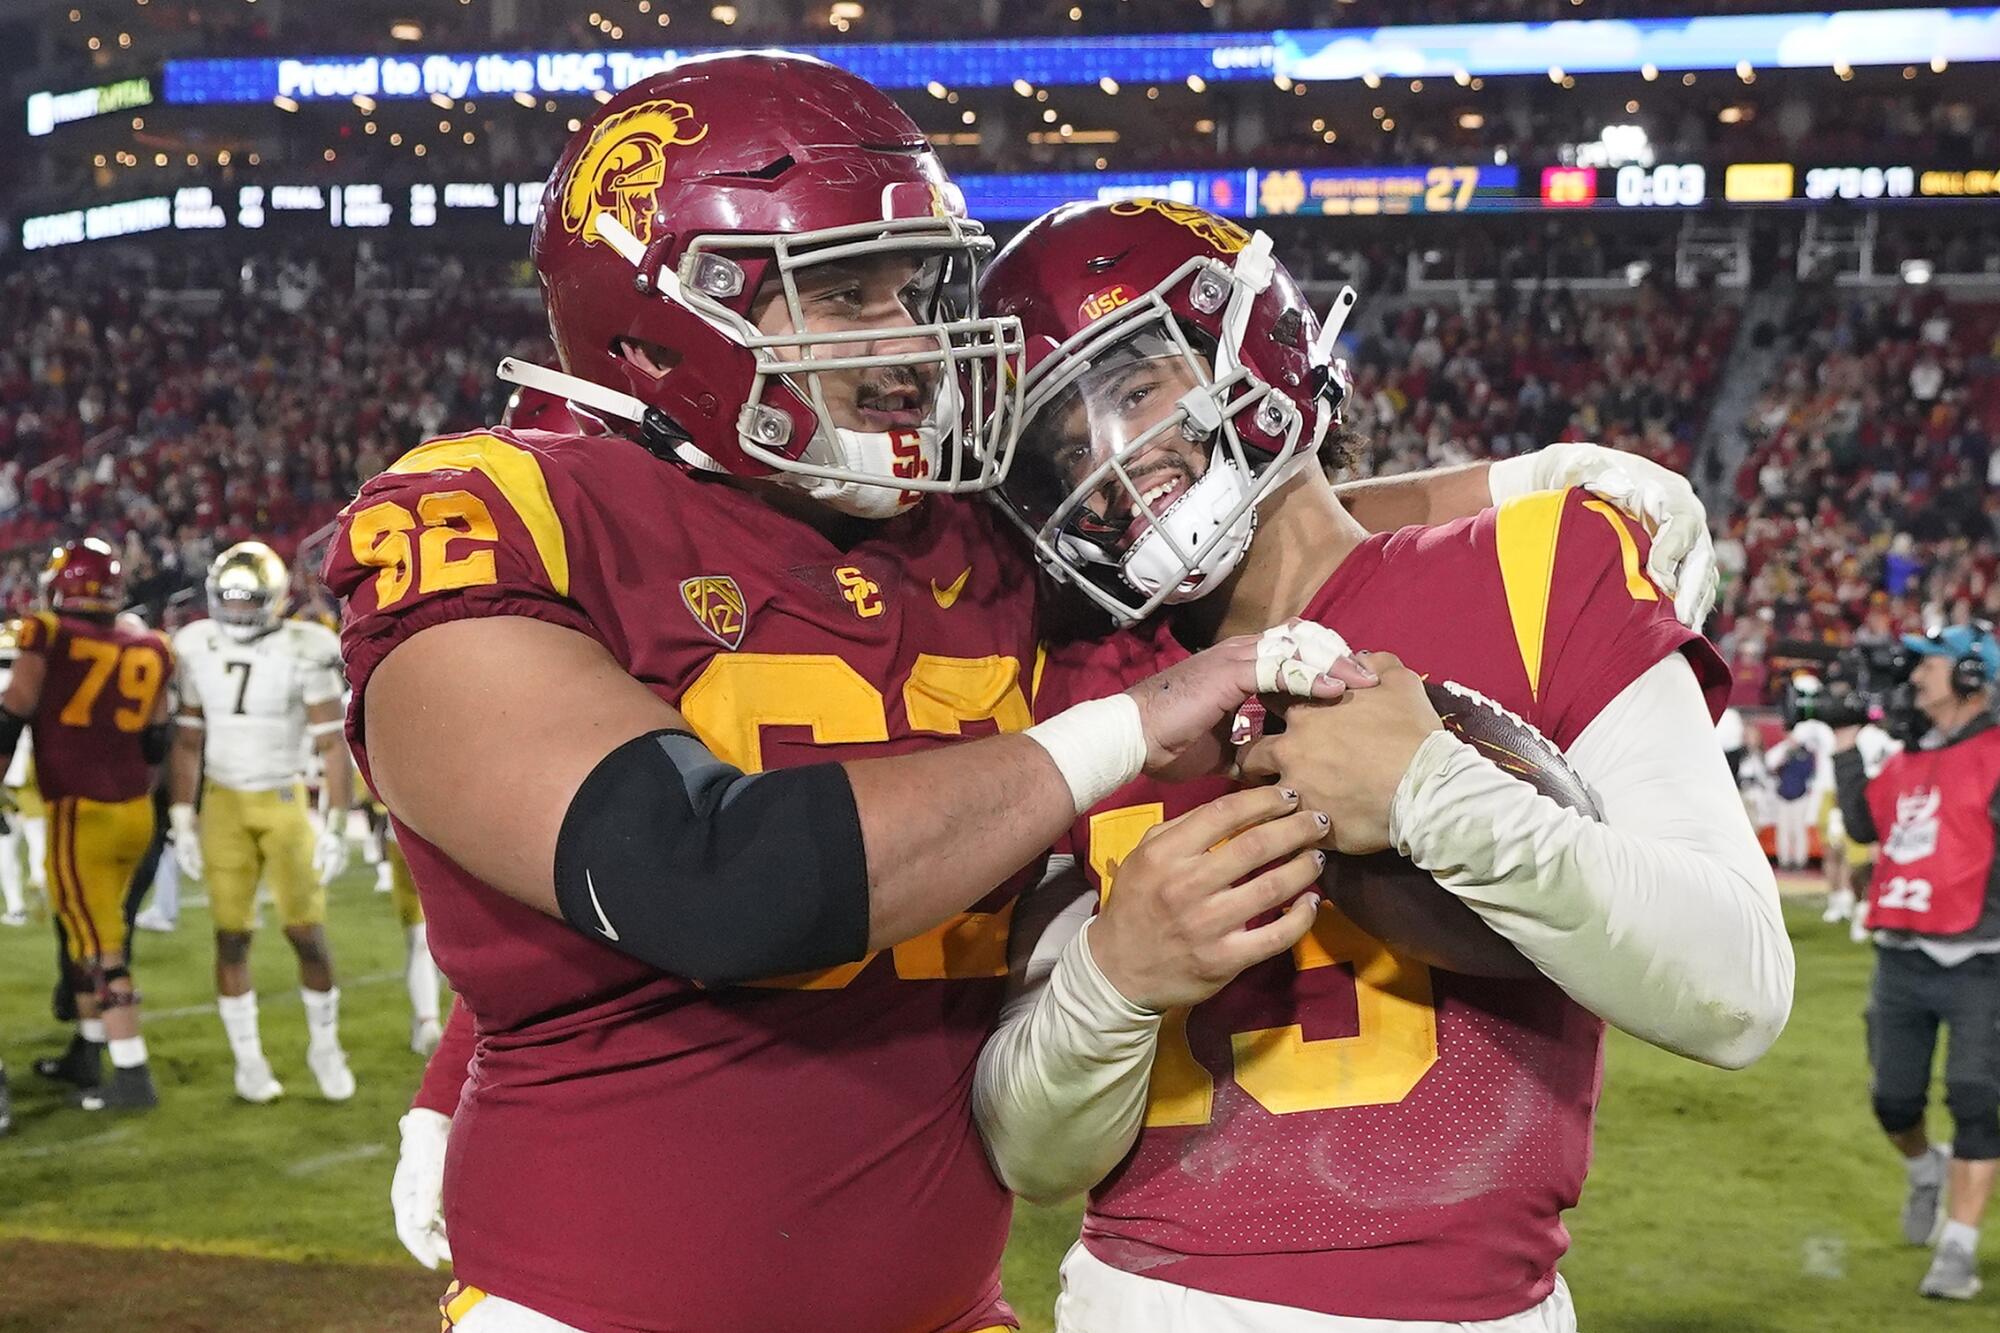 USC quarterback Caleb Williams gets a hug from offensive lineman Brett Neilon after the Trojans defeated Notre Dame 